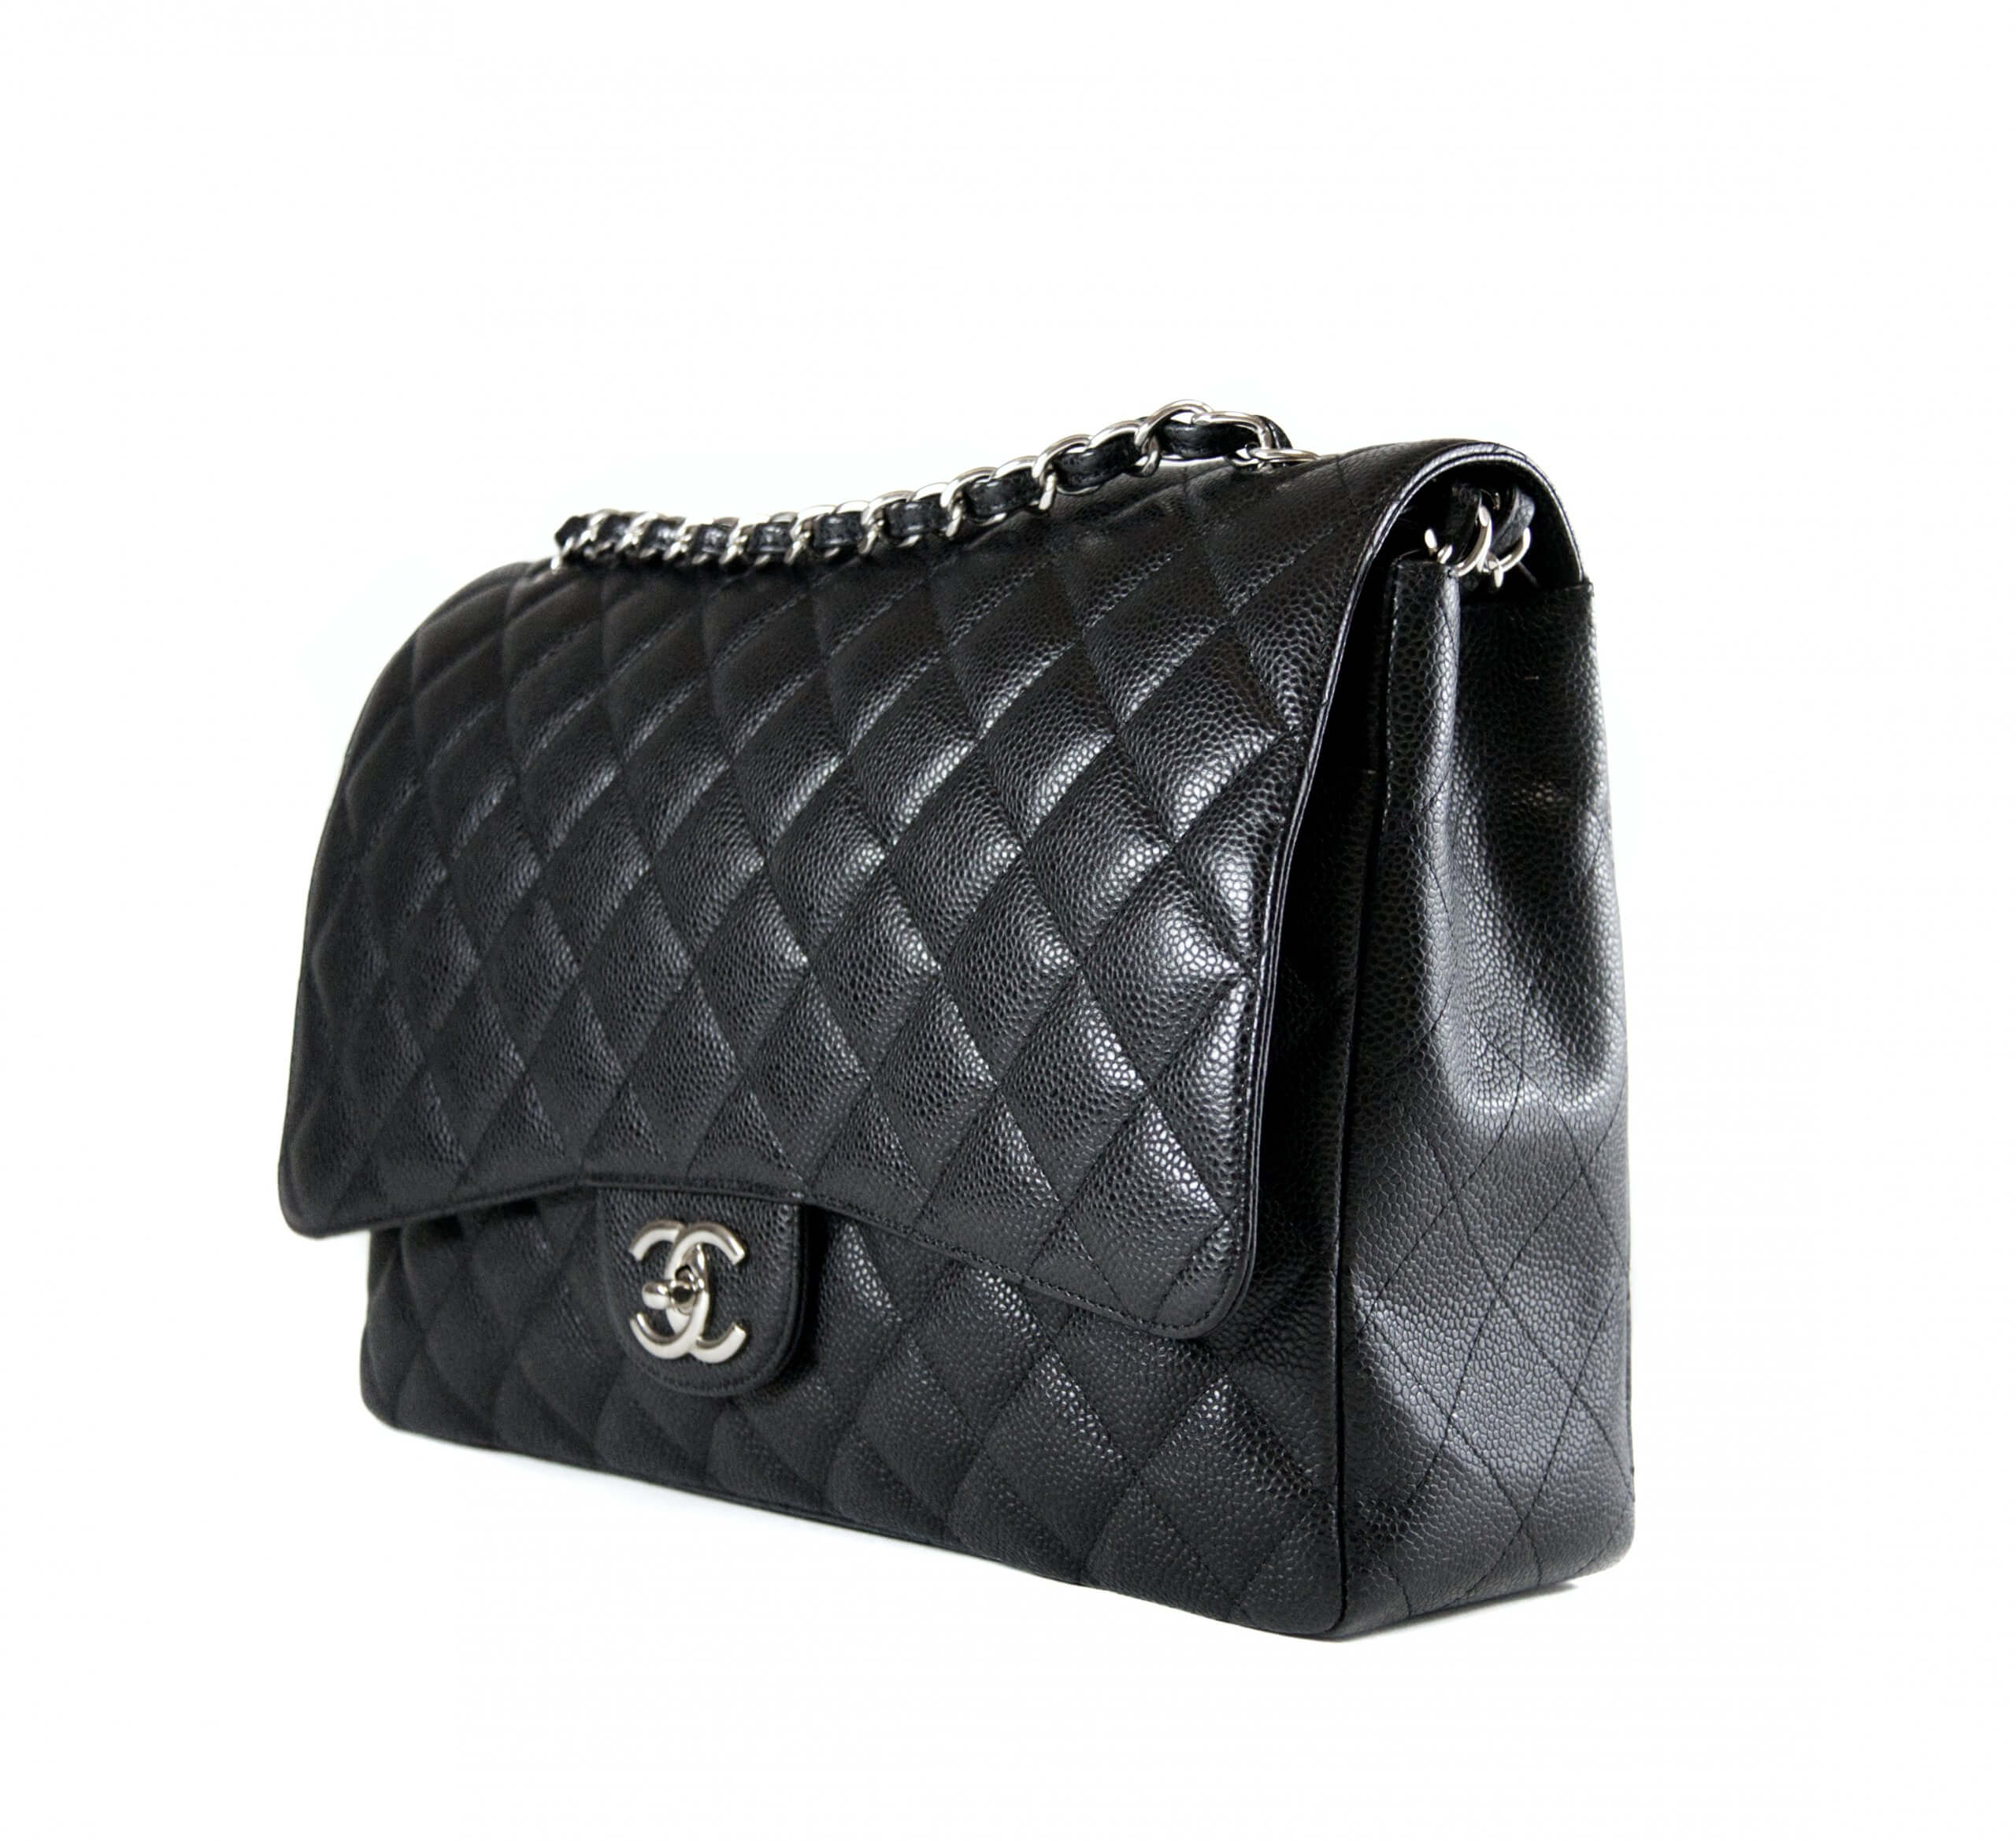 Chanel pre-owned maxi classic - Gem